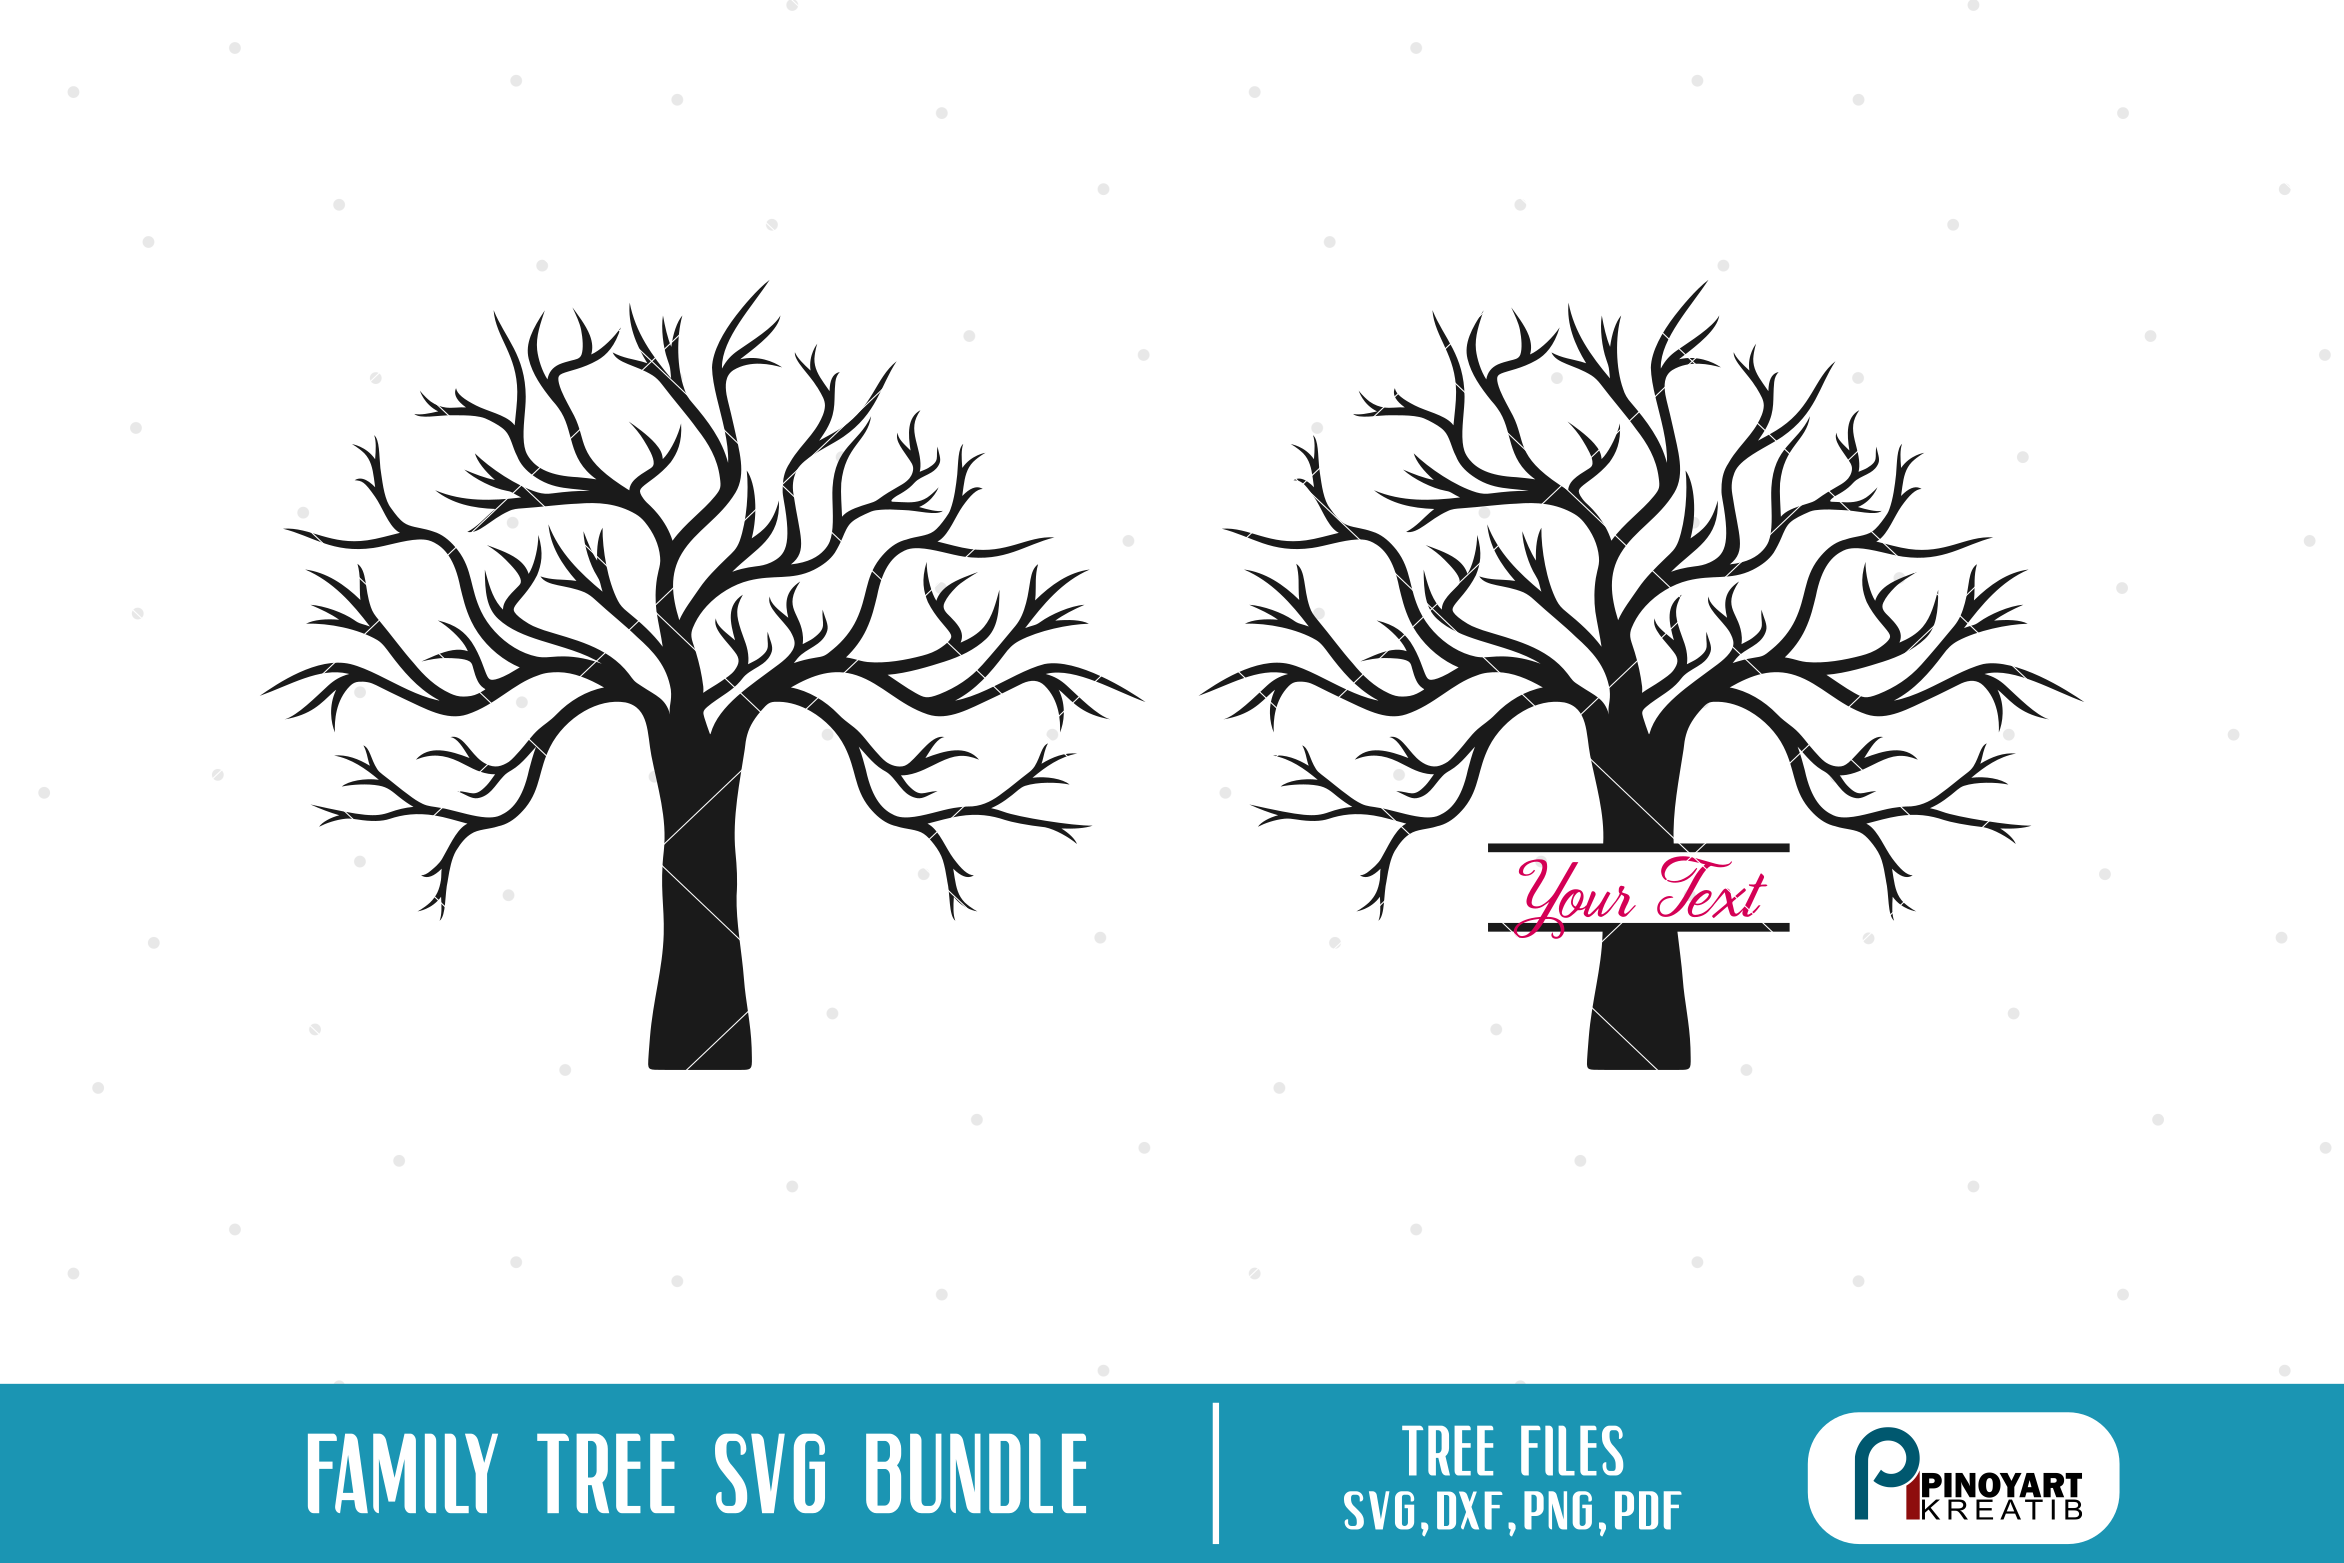 Download Family Tree Svg Free 13 Kids : Family tree svg free file ...